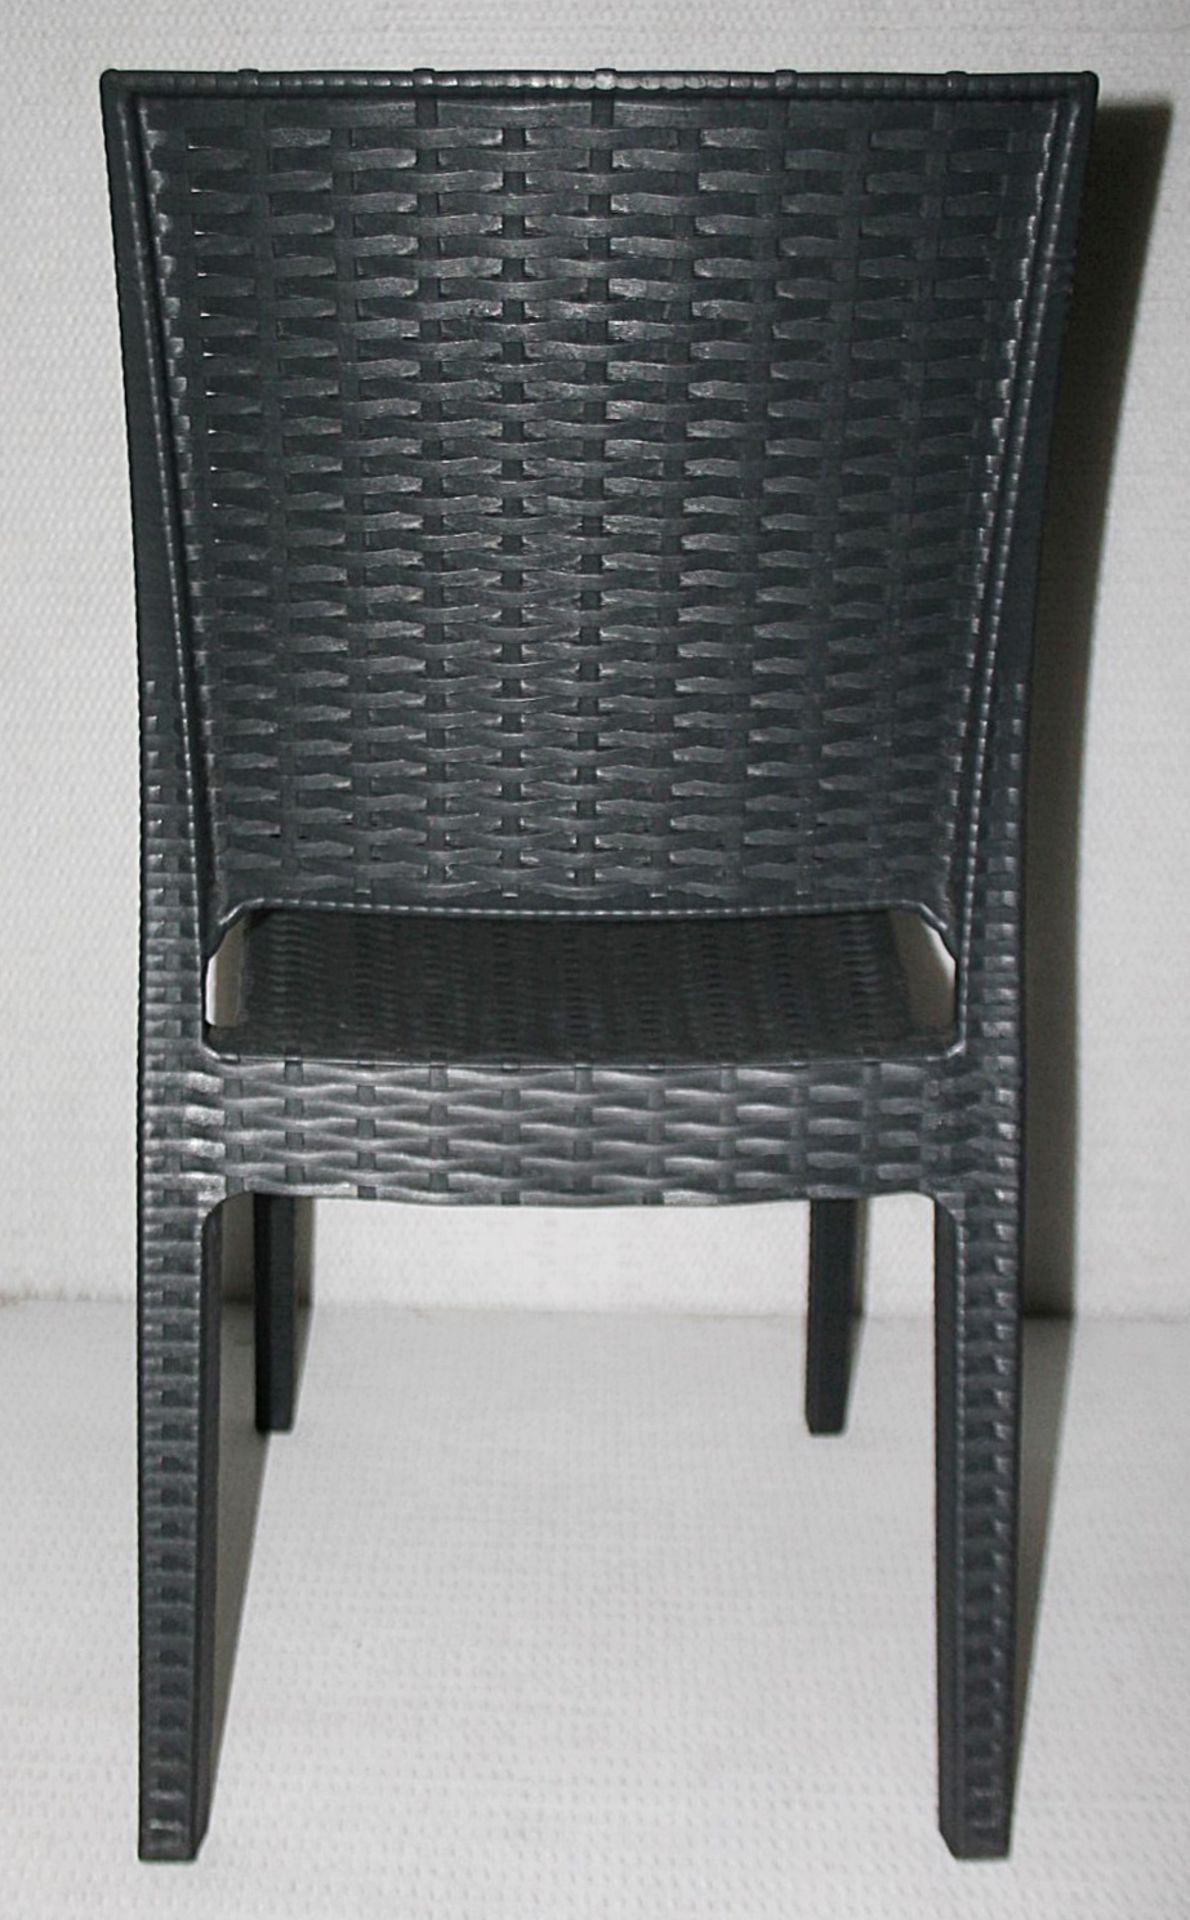 8 x Siesta 'Florida' Rattan Style Garden Chairs In Dark Grey - Suitable For Commercial or Home Use - - Image 2 of 14